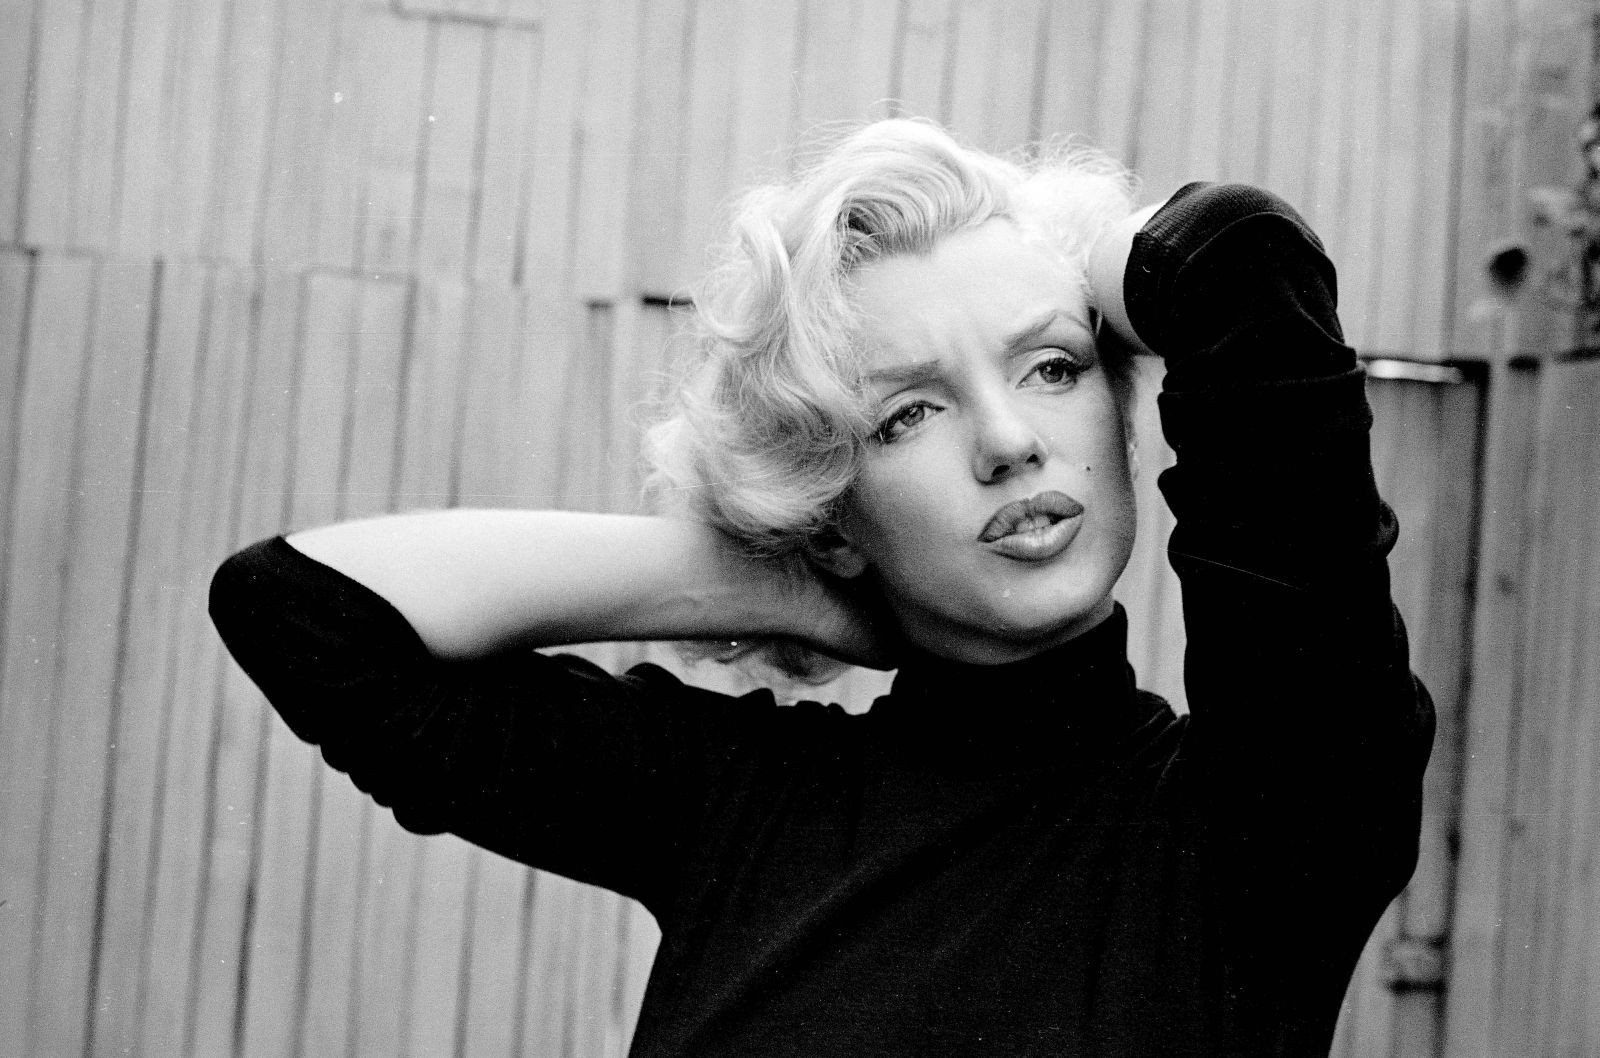 Vintage desktop wallpaper of Marilyn Monroe, a famous celebrity, created by LIFE Magazine.